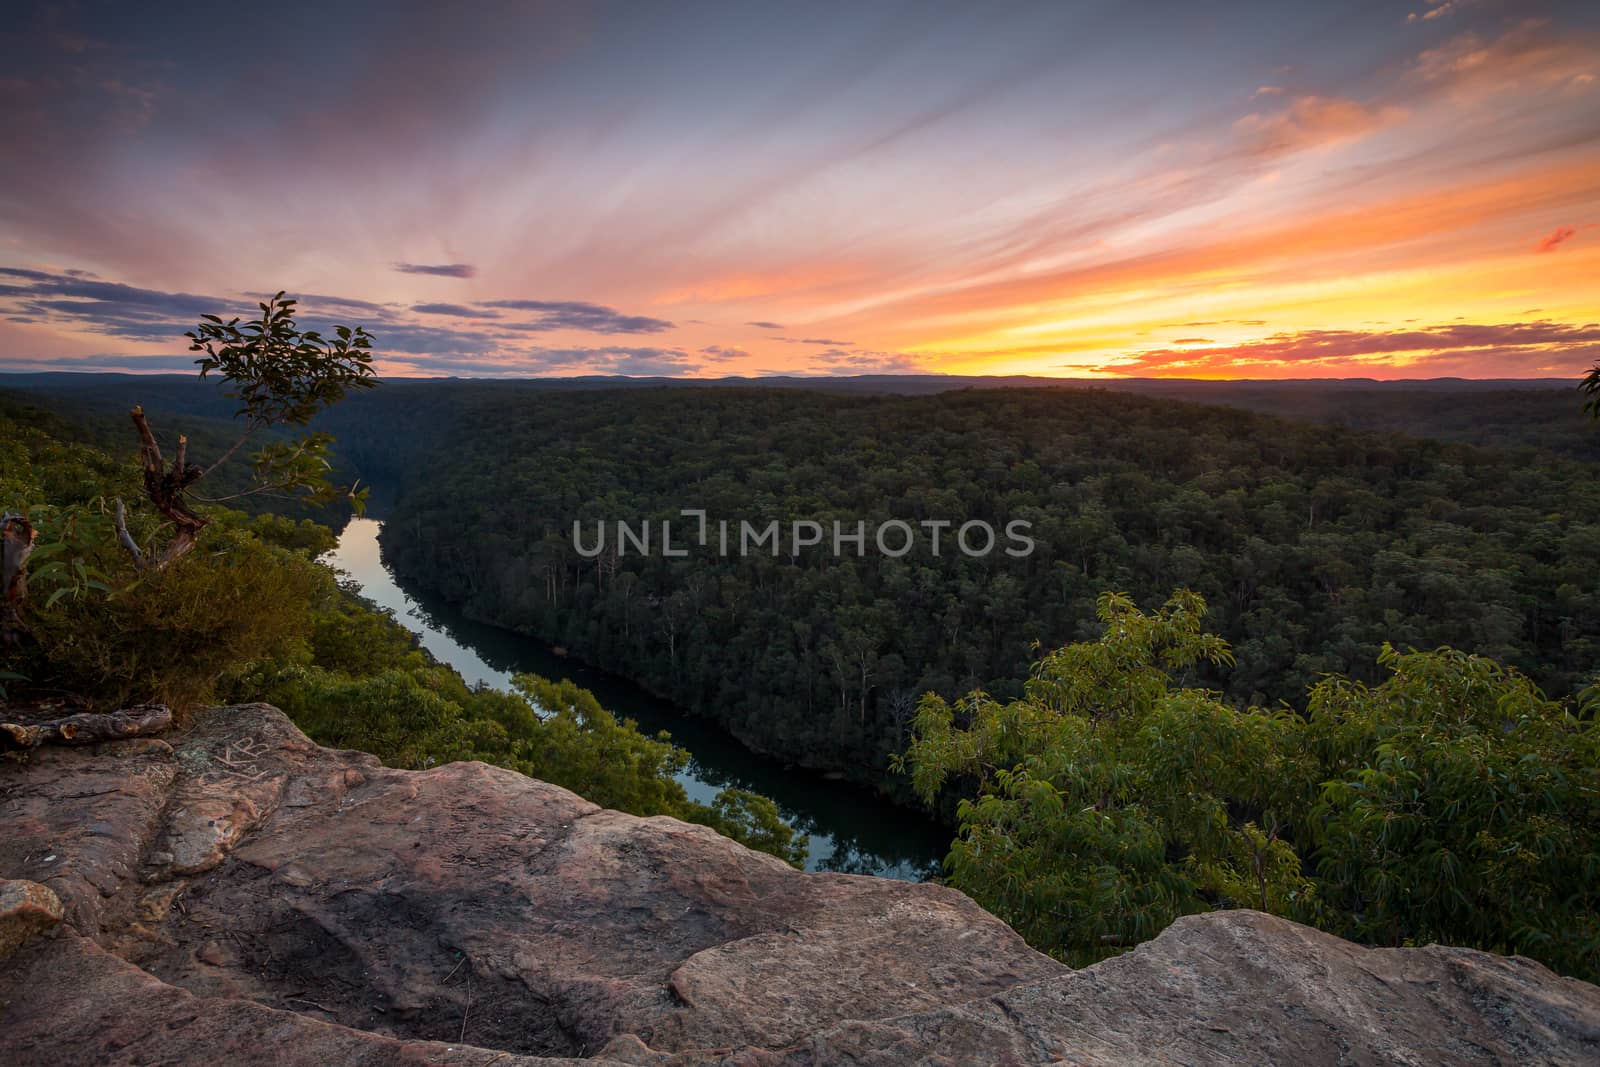 Nepean River and Nepean Gorge at a fiery vivid sunset